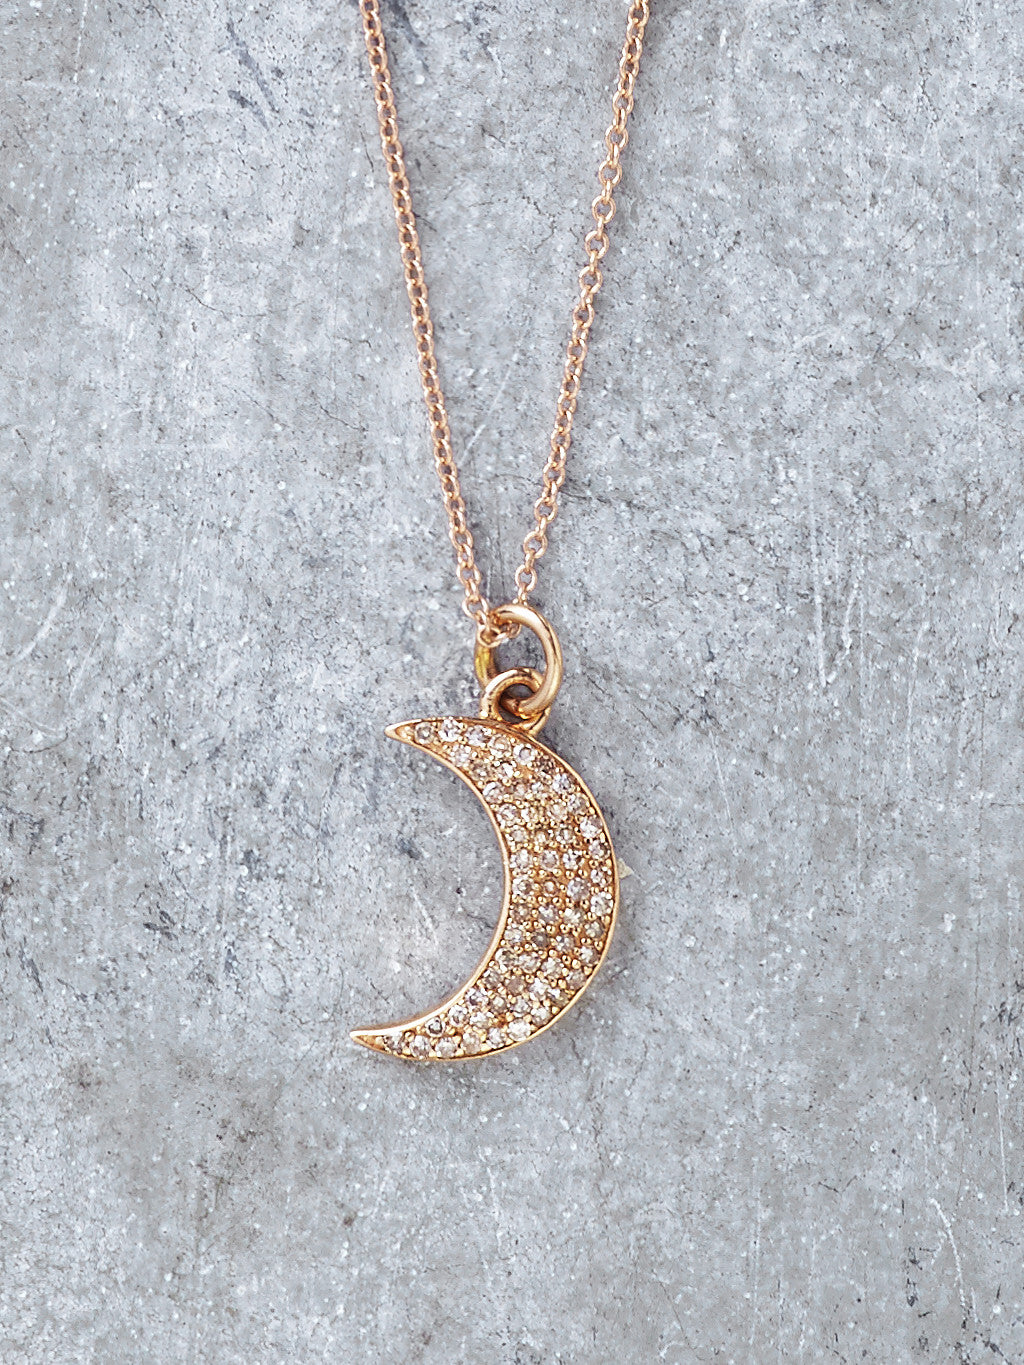 Crescent Moon Pendant Necklace in 92.5 Silver – HighSpark